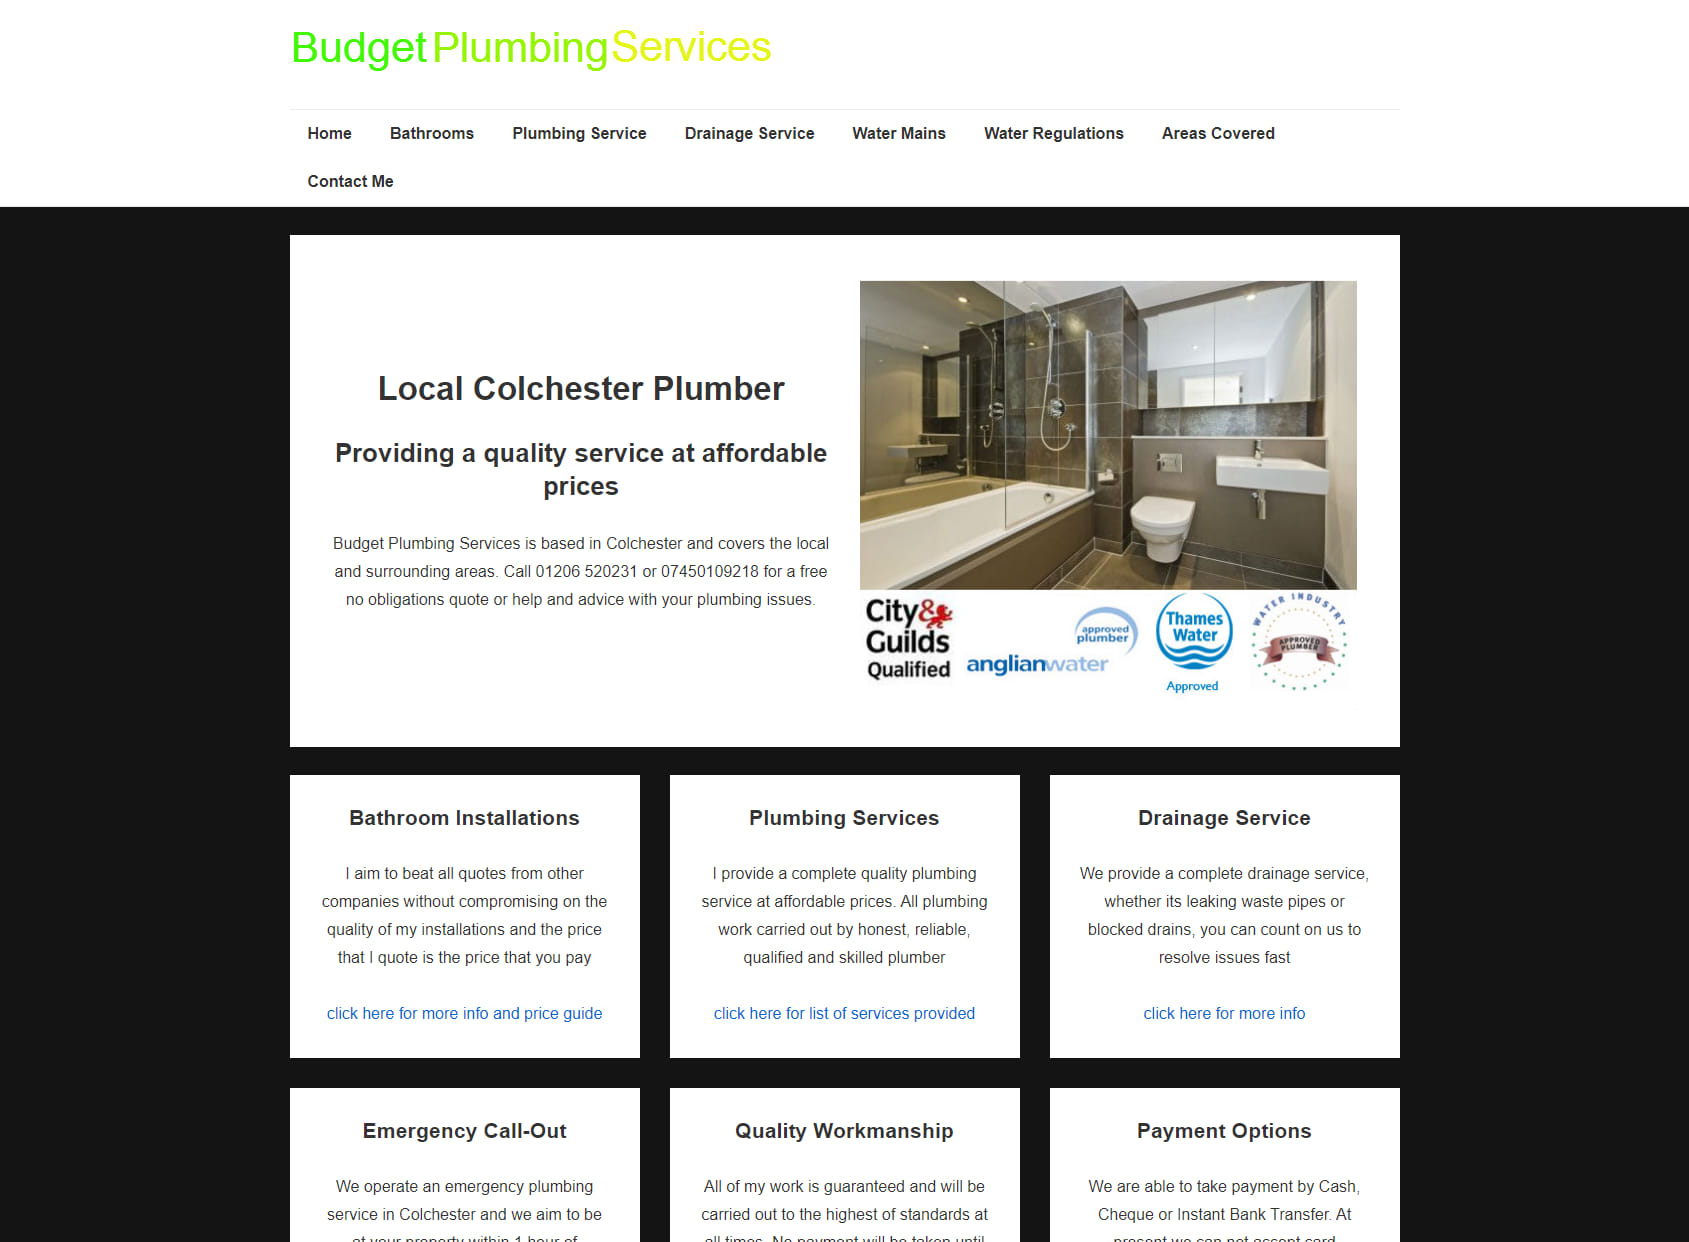 Budget Plumbing Services